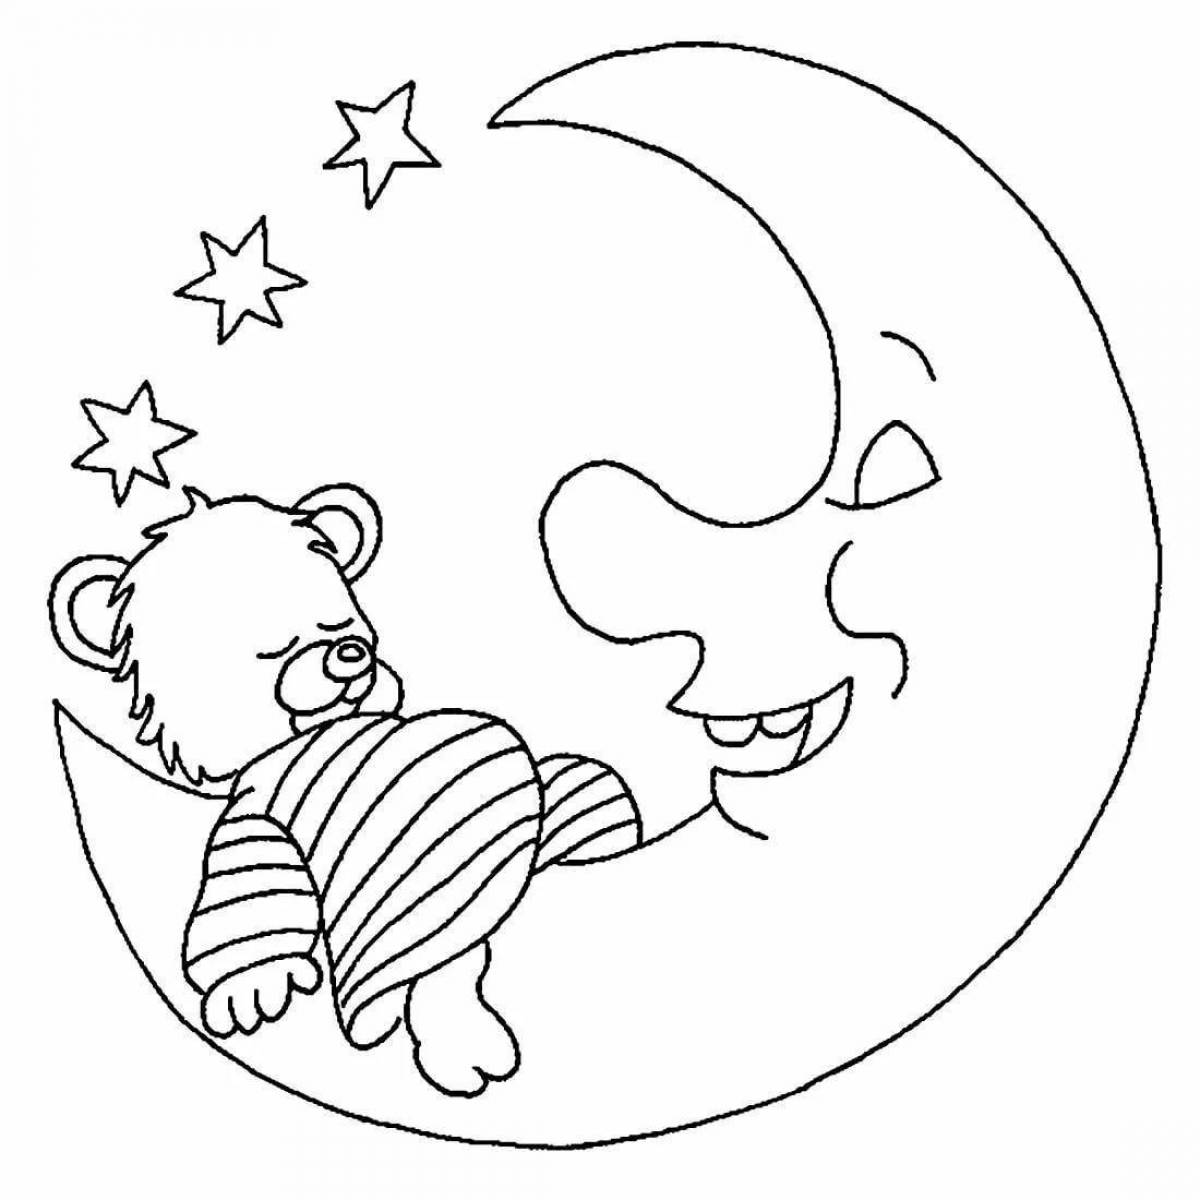 Shining Crescent coloring page